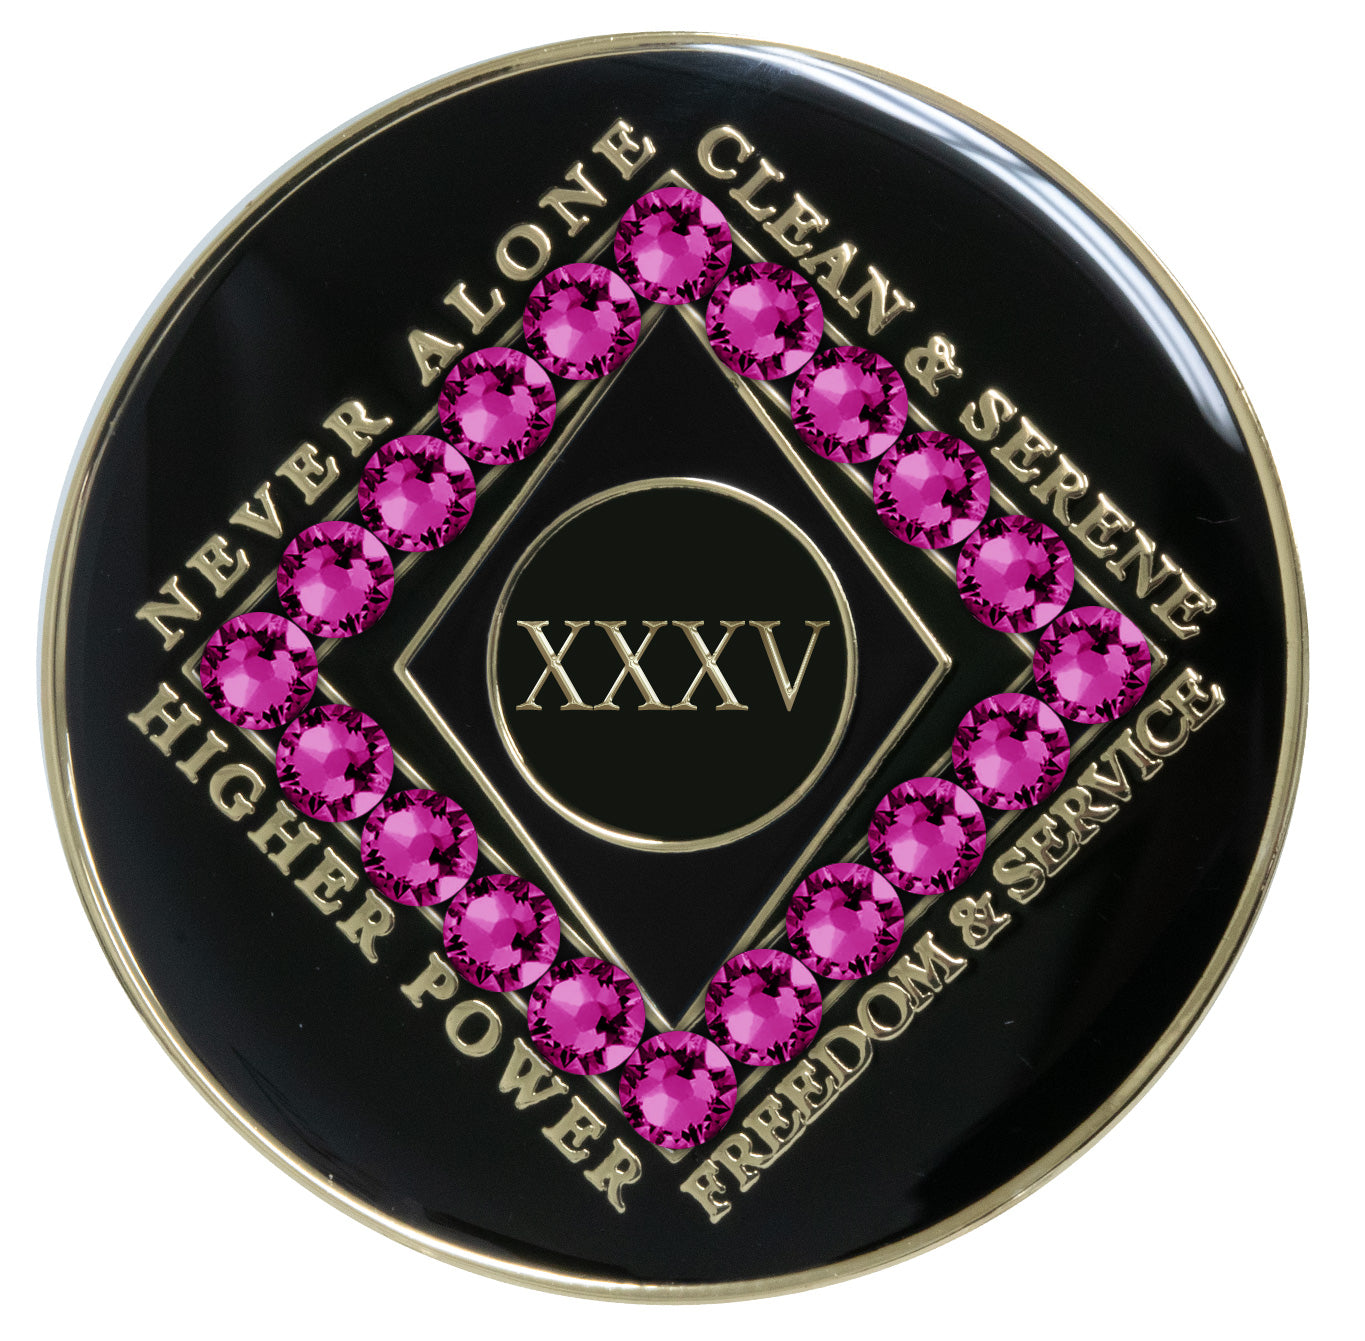 Clean Time Recovery Medallion with Fuchsia Crystals